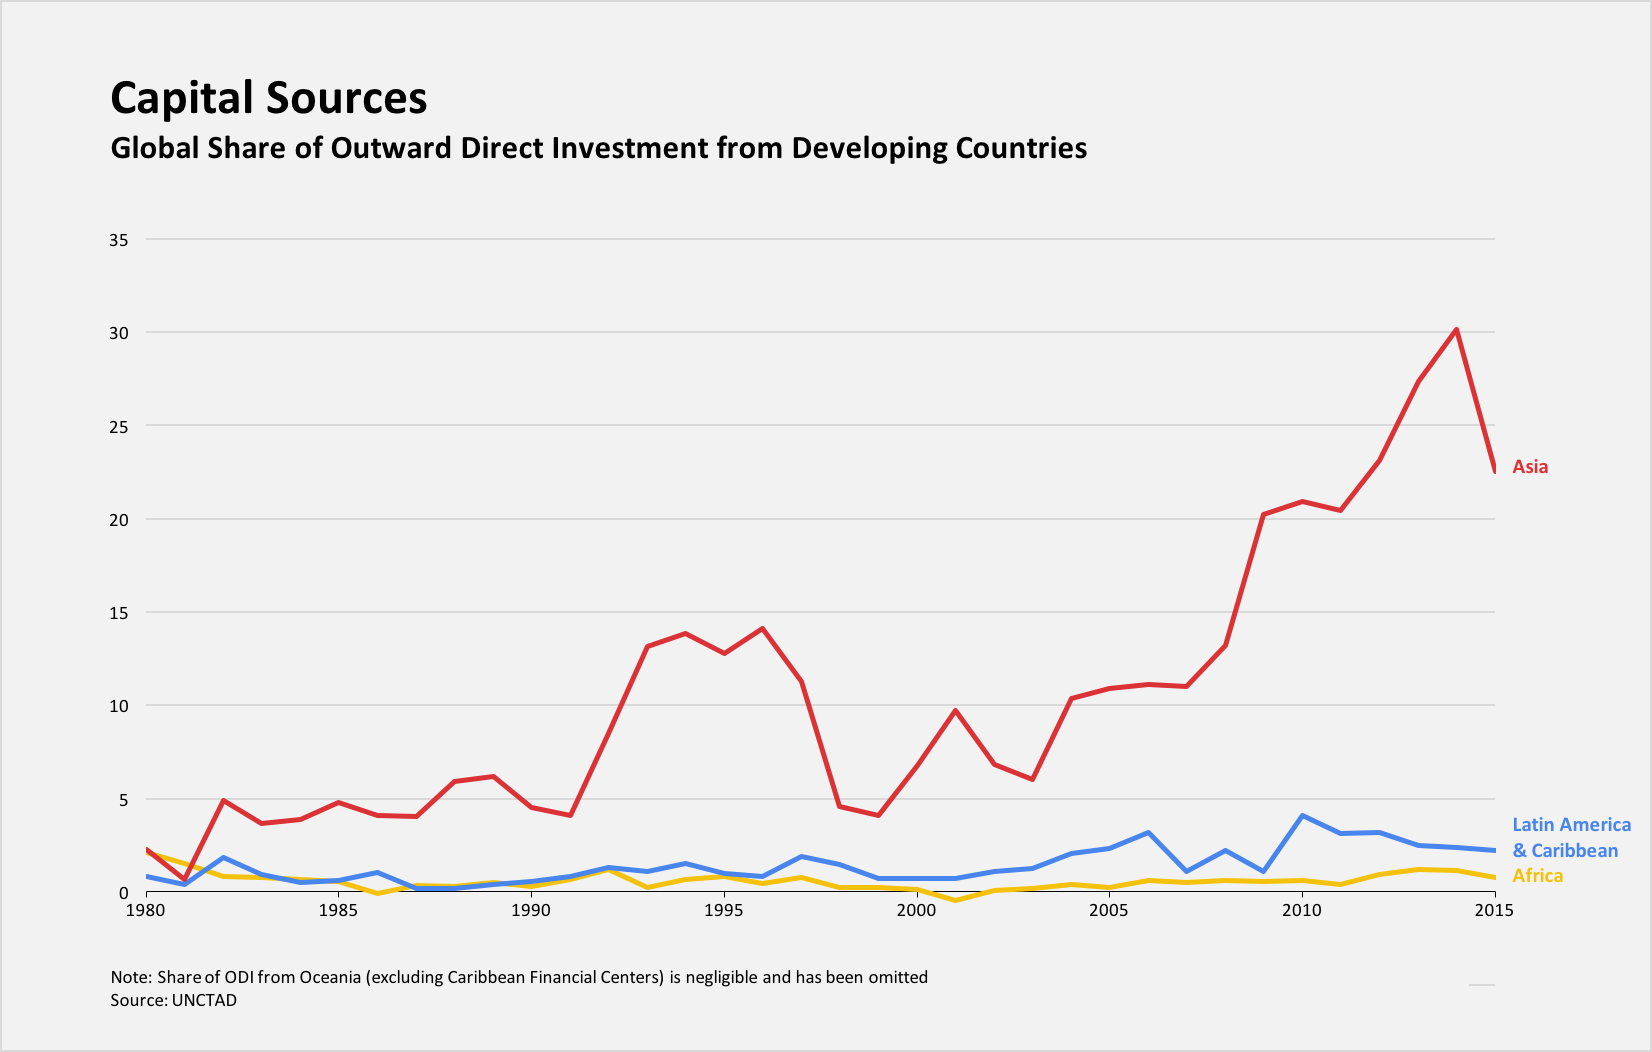 Outward Direct Investment from Developing Economies